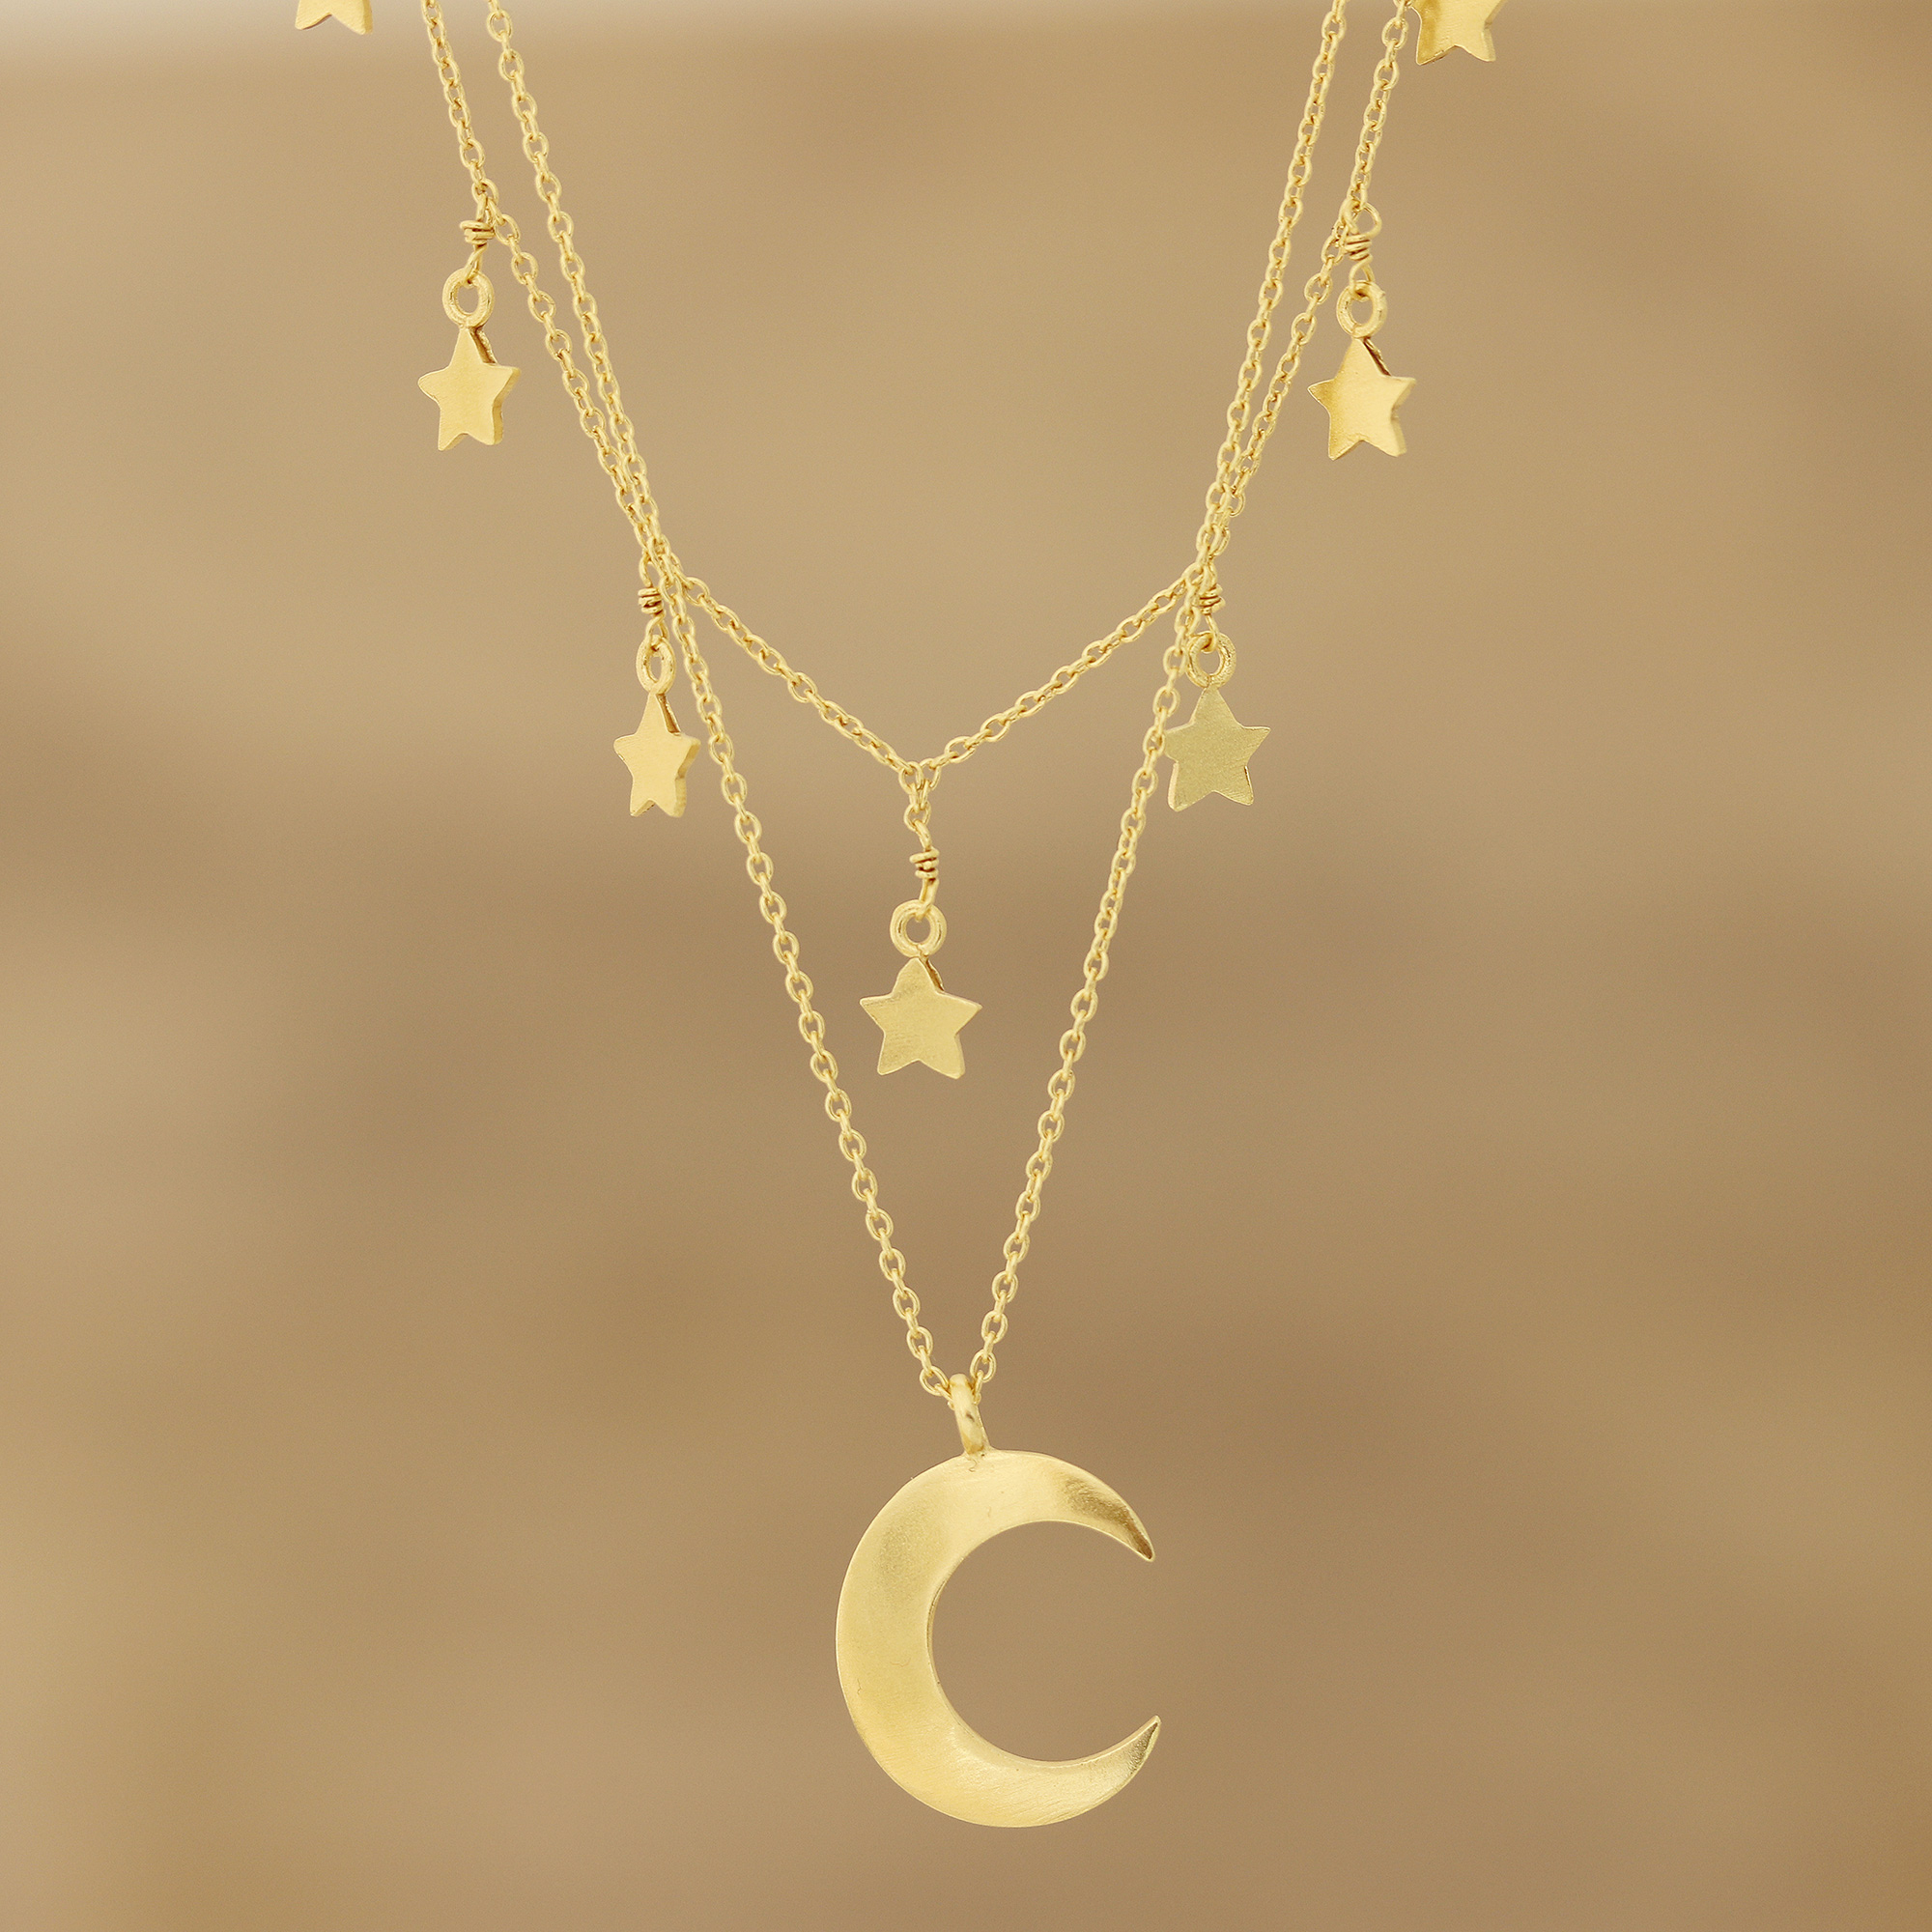 Celestial - Eclipse Pendant with Gold Sun and Sterling Moon Jewelry